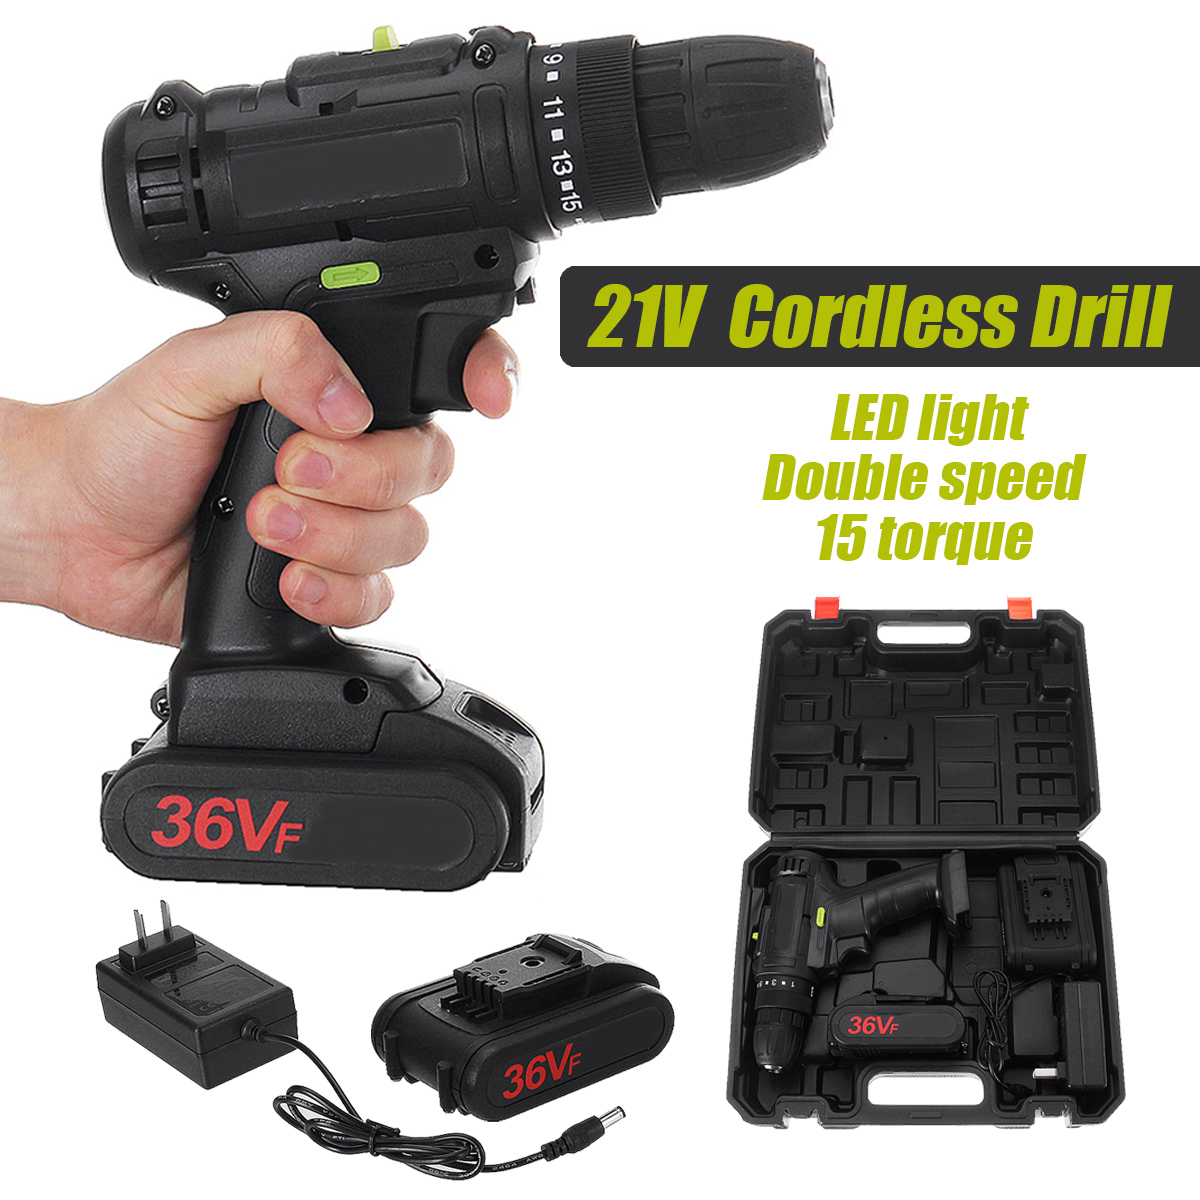 21V-1500mAH-LED-Light-Electric-Drill-Driver-Cordless-Rechargeable-Hand-Drills-2-Speed-Home-DIY-1574103-2